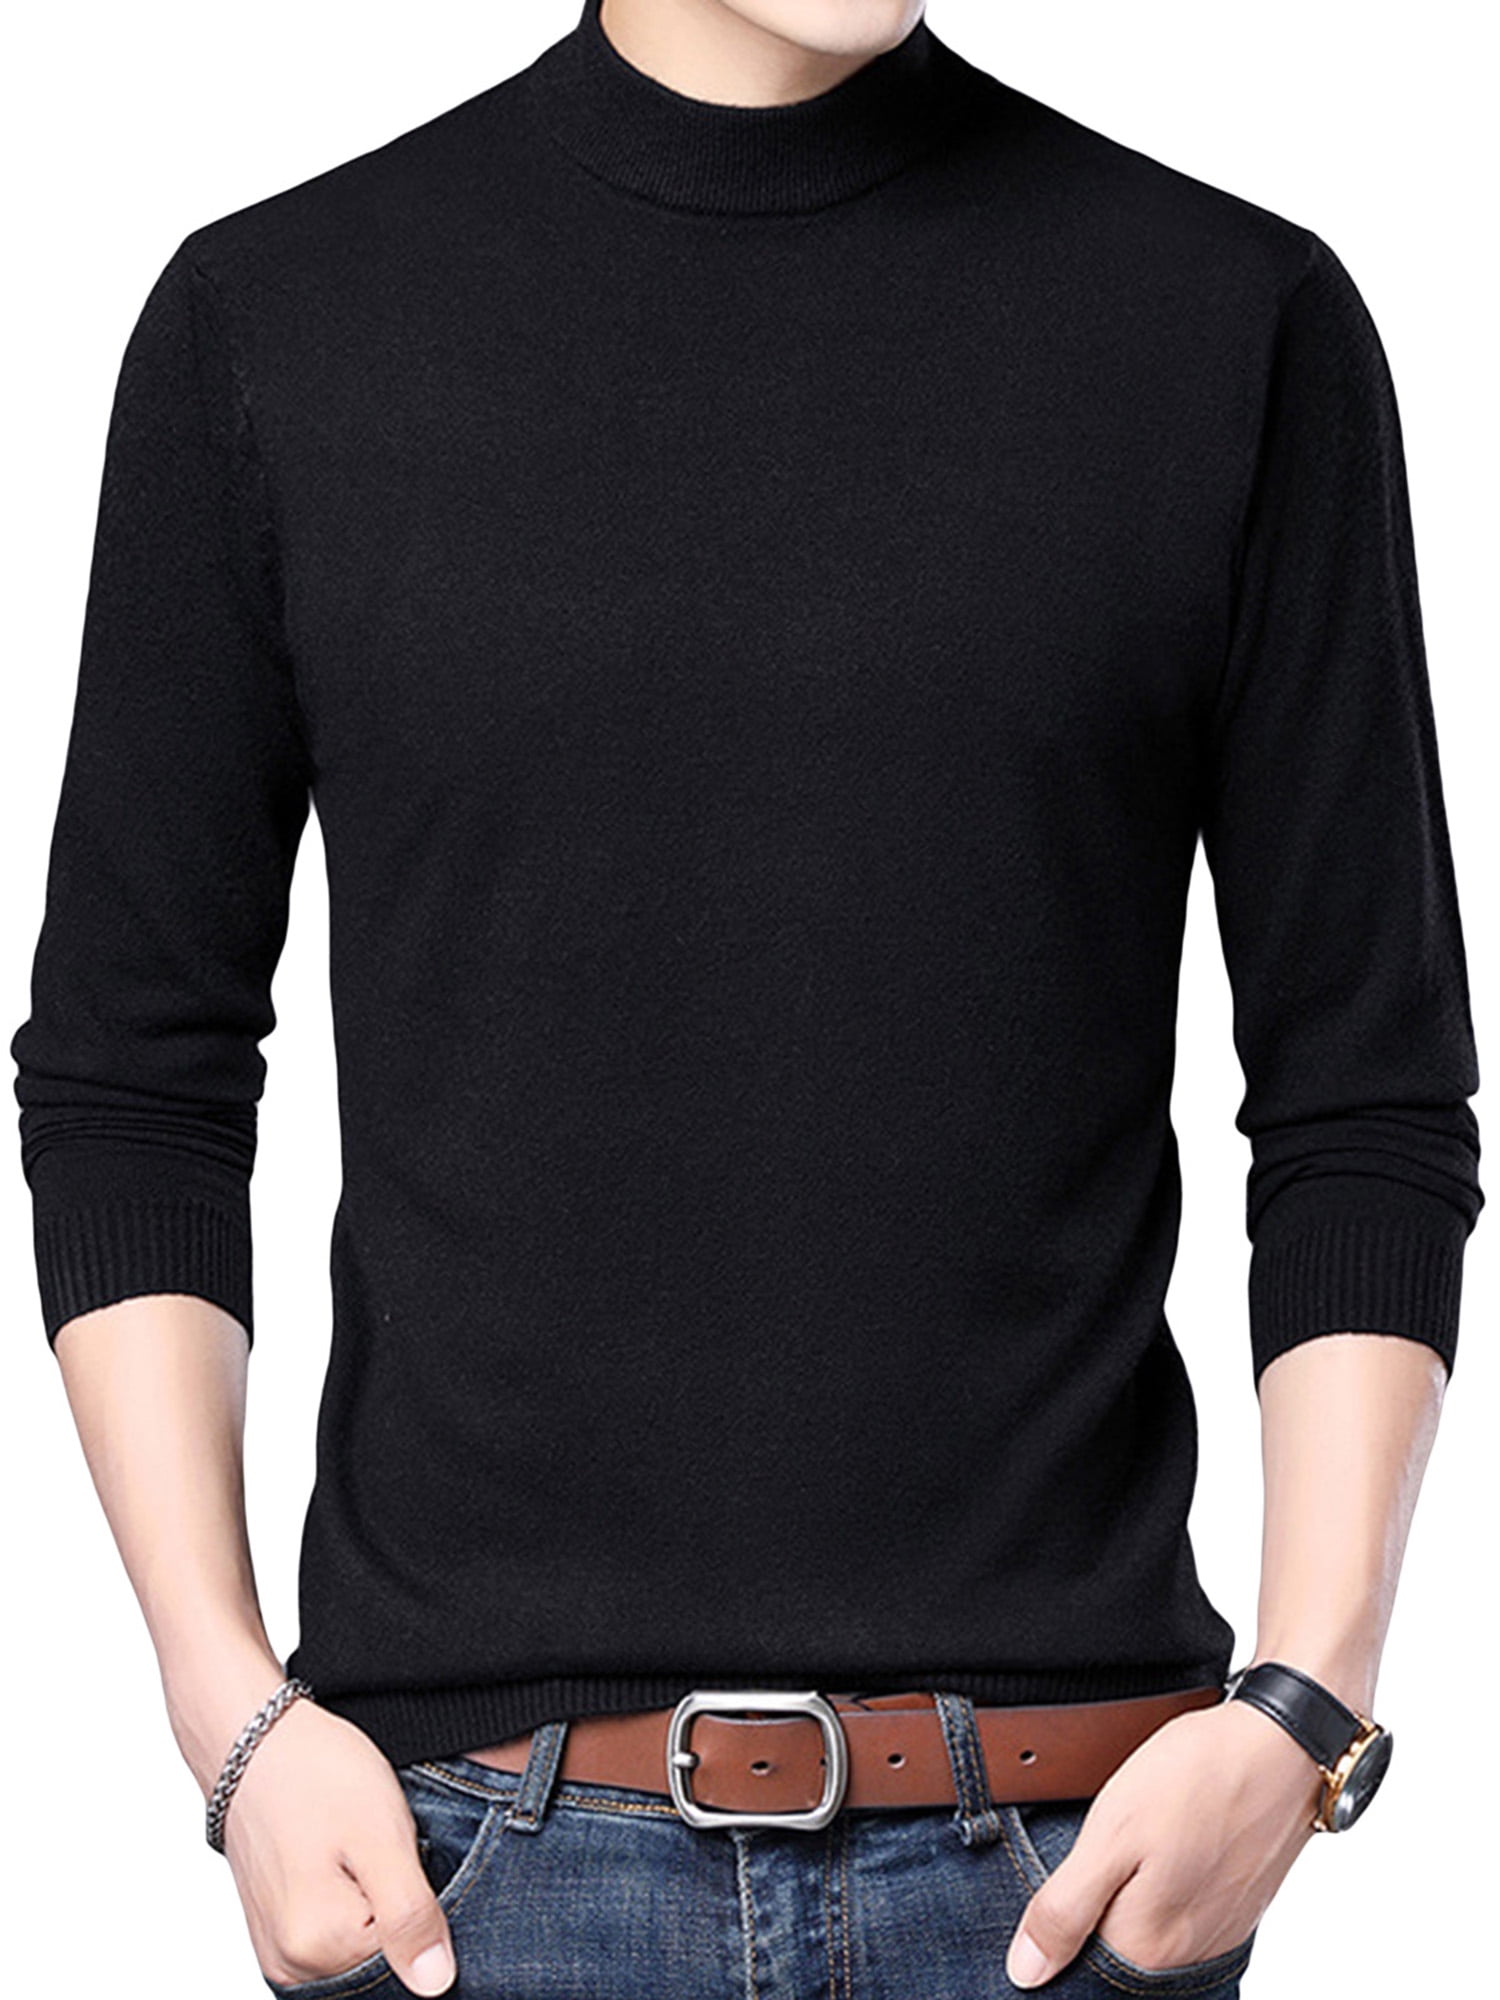 Mens Solid Autumn Winter Tops Slim Fit Long Sleeve Sweater 